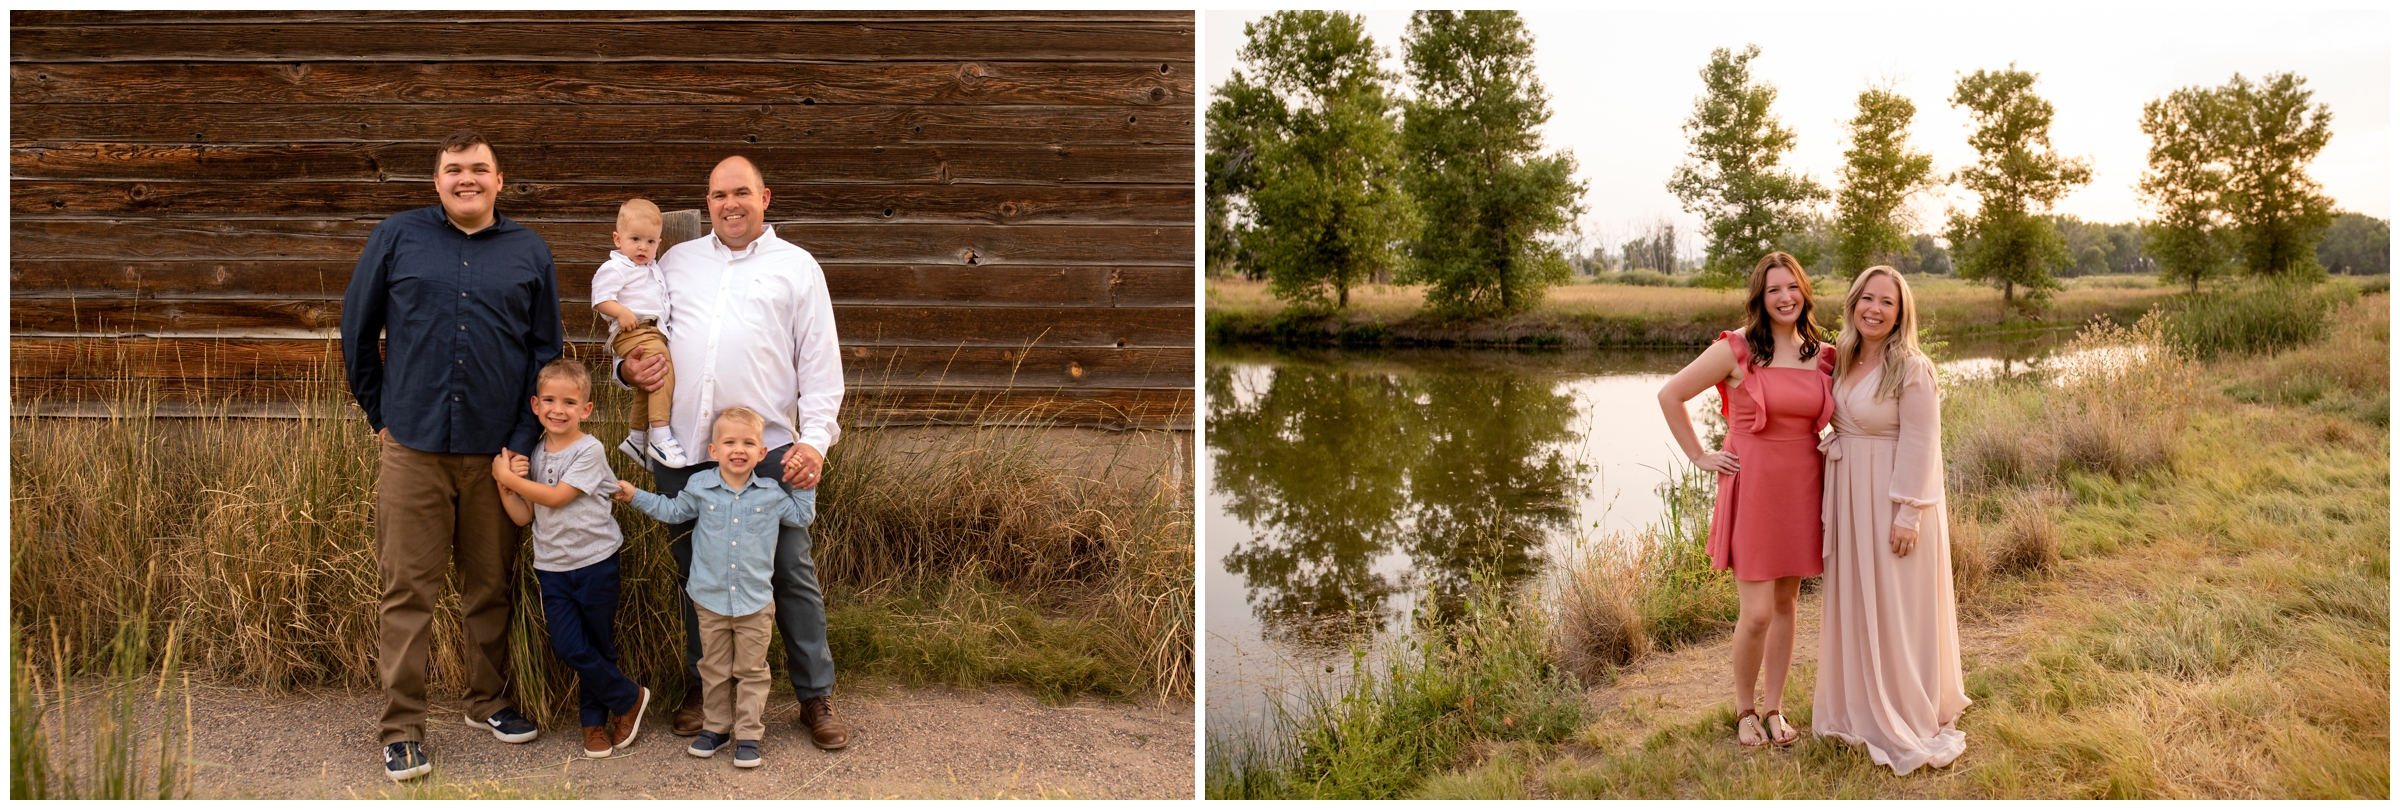 family posing in front of rustic wooden barn at Sandstone Ranch Longmont family pictures 